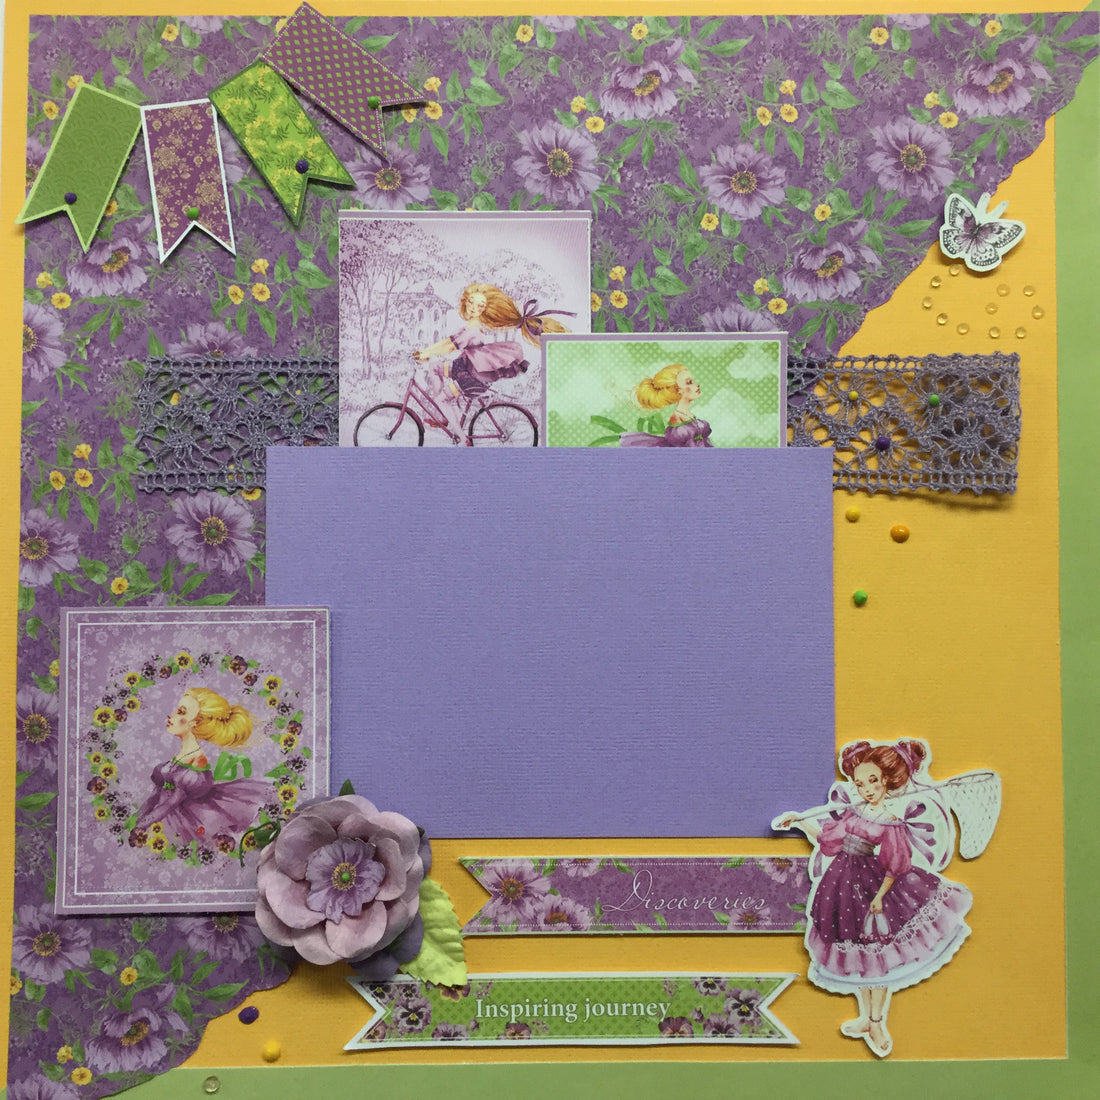 ScrapBerry’s PRECIOUS MEMORIES Single Layout Page Kit